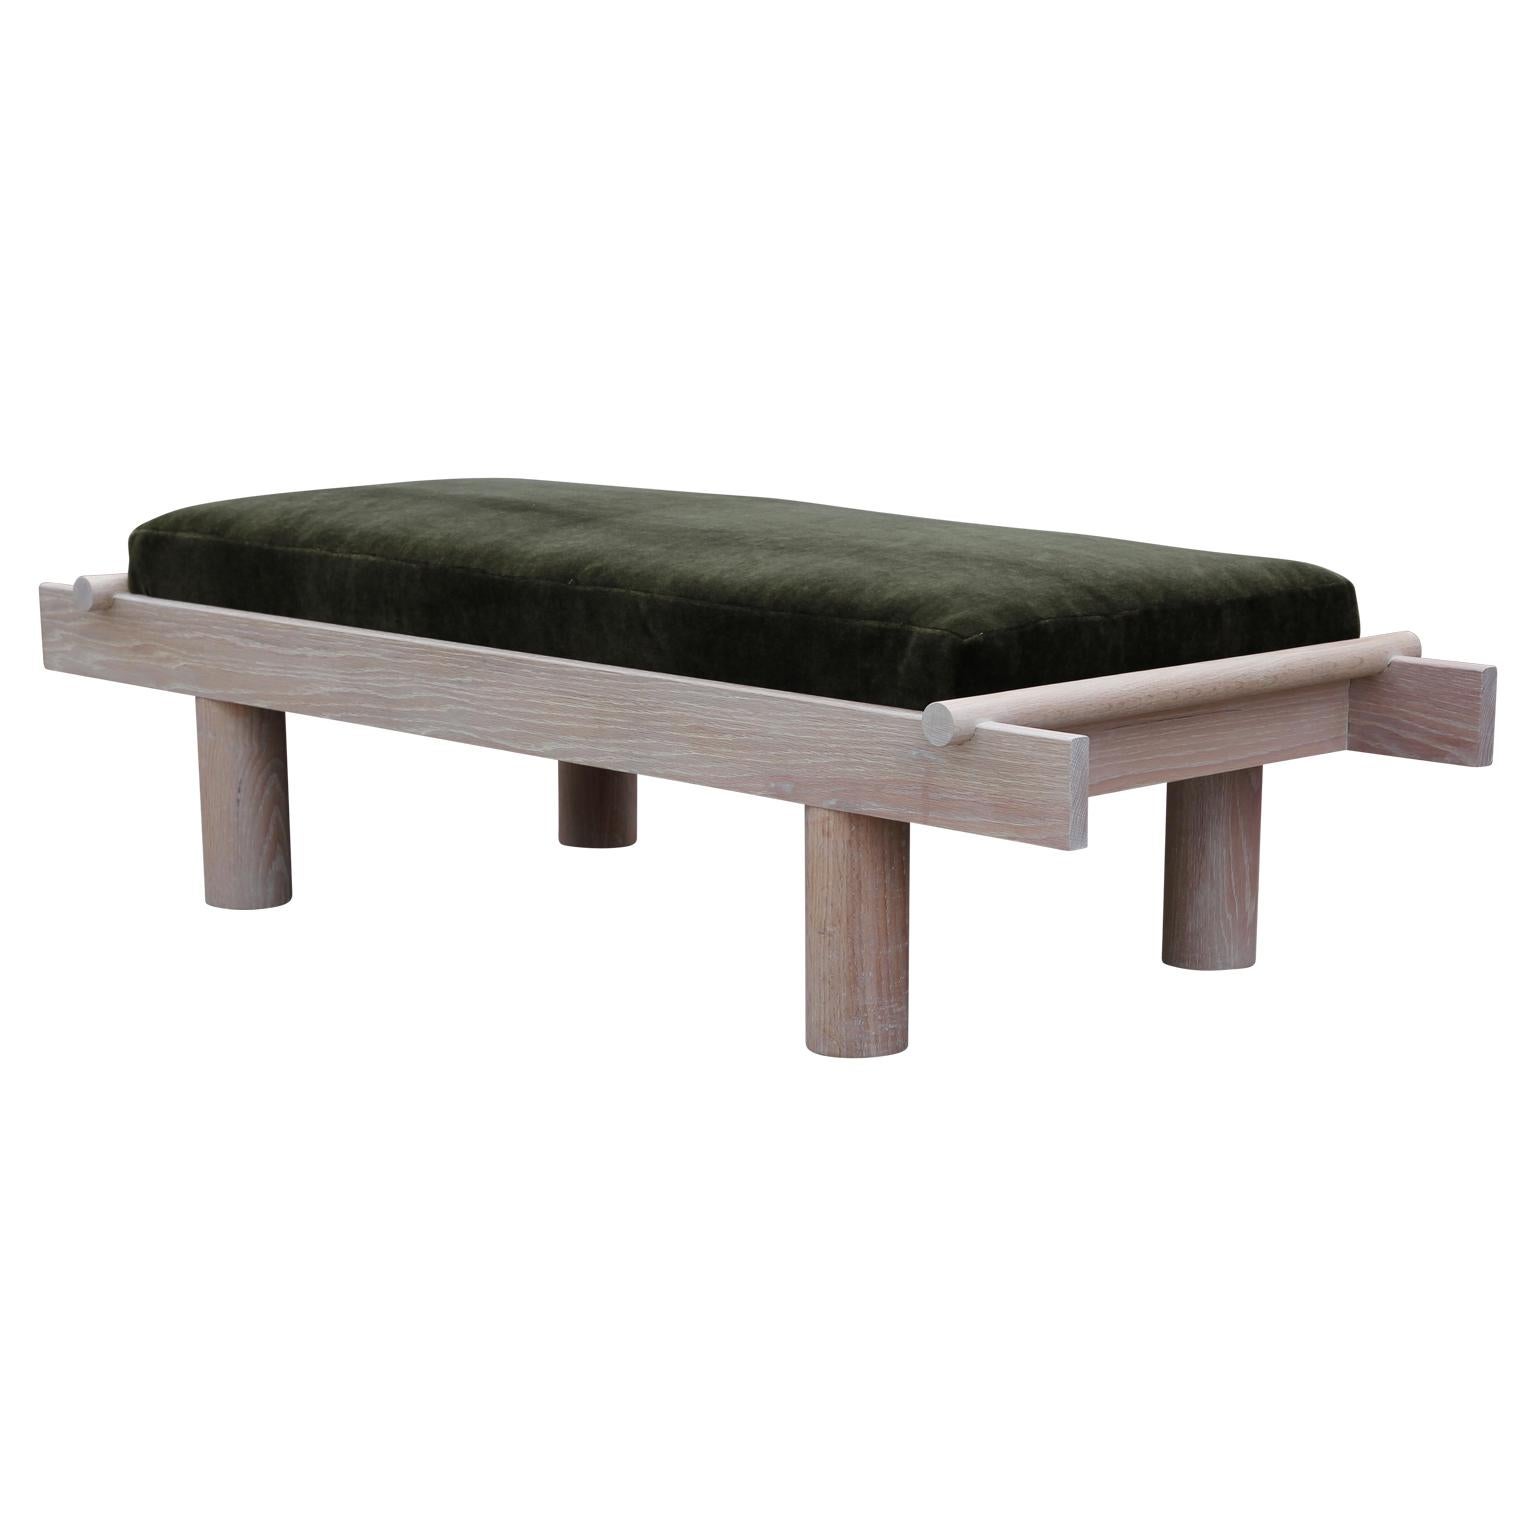 Custom made Postmodern style bench with a unique sculptural design. The bench is made from natural Cerused oak and the cushion is upholstered in green mohair.
       